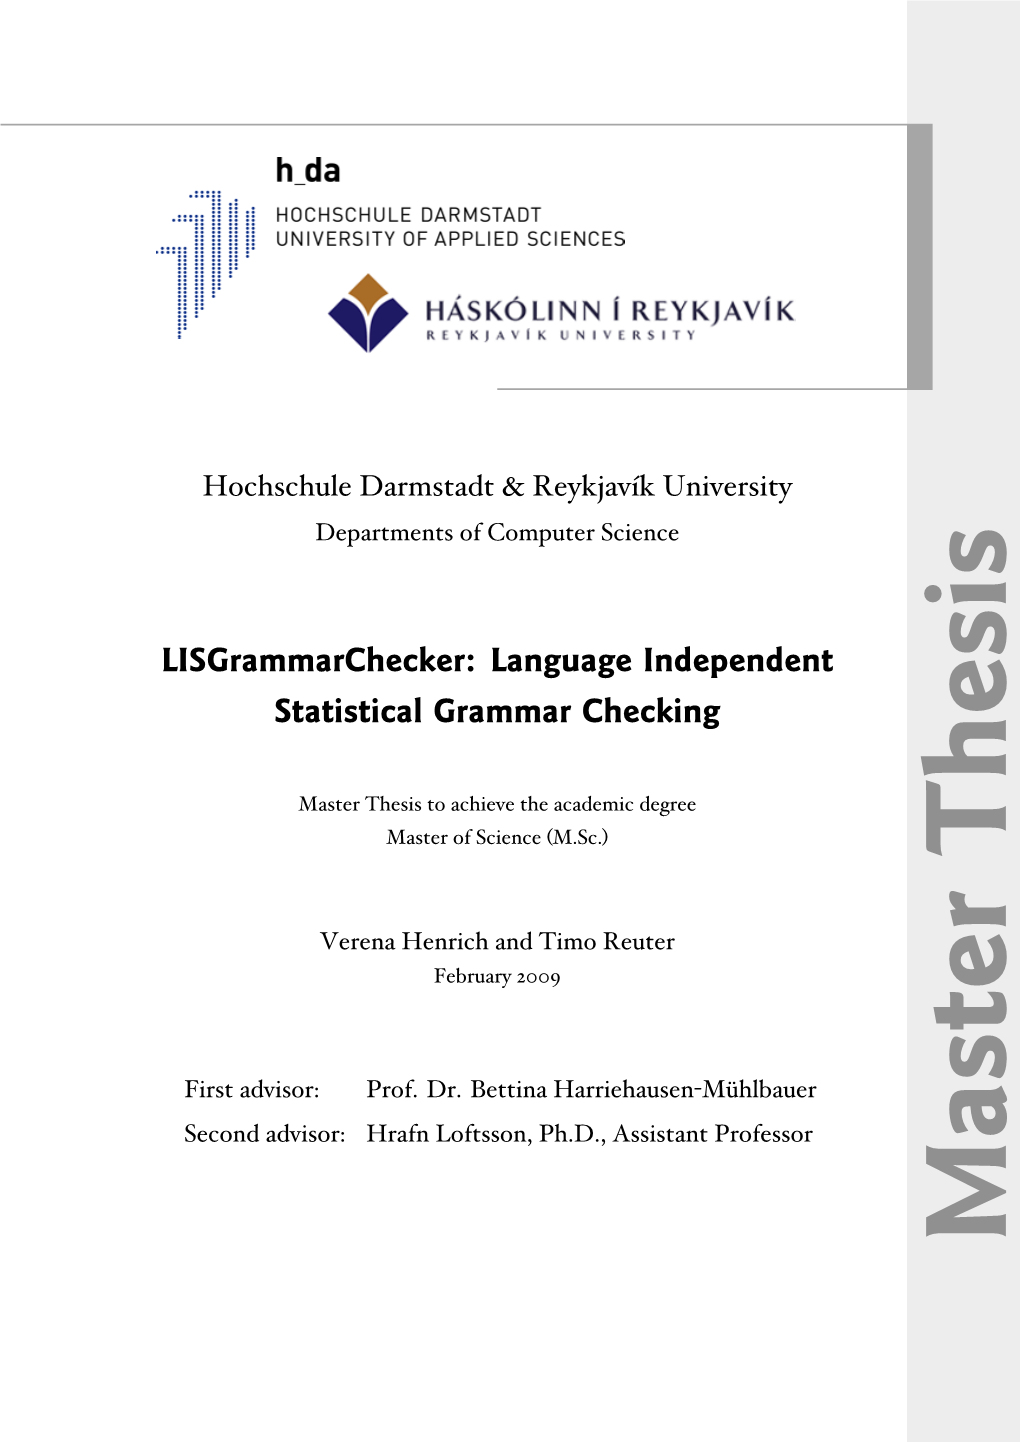 Language Independent Statistical Grammar Checking Approach and Compare It to Existing Approaches